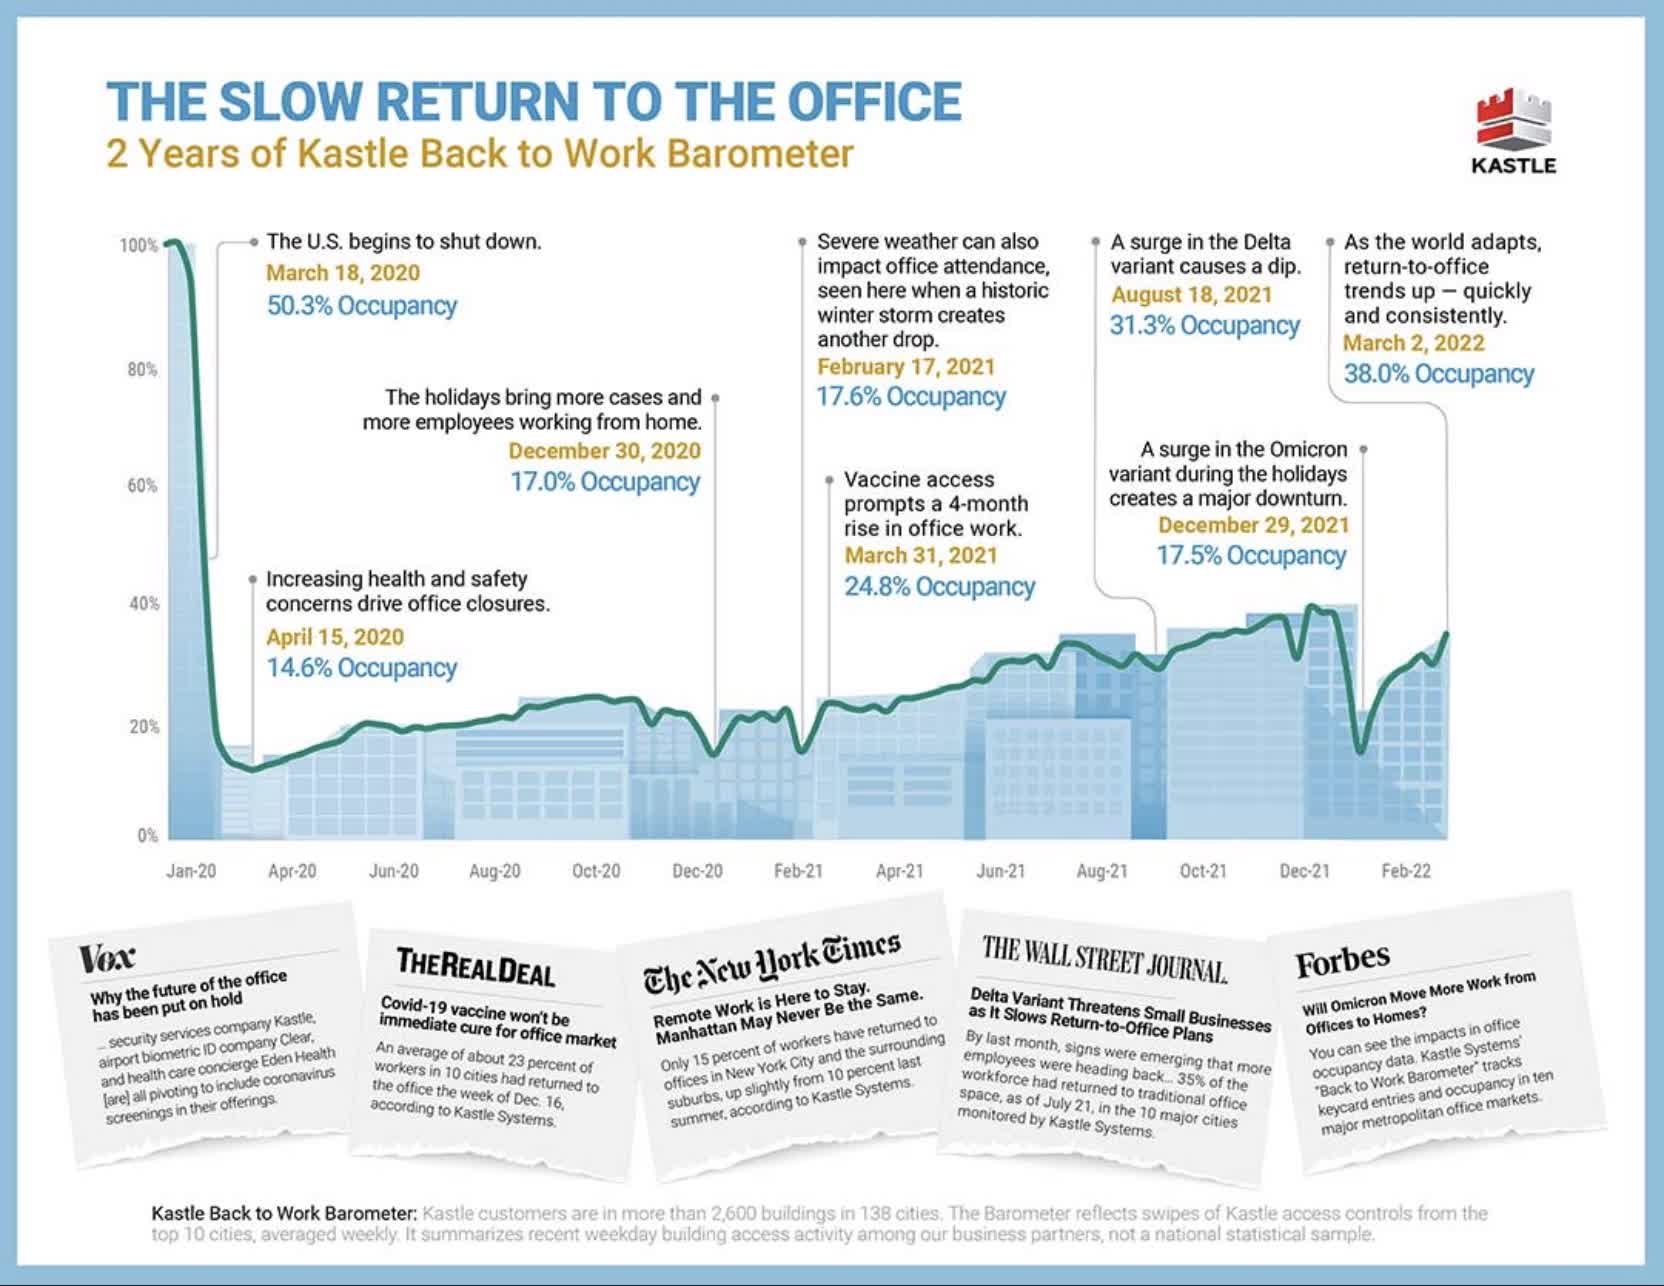 Highlights and headlines about Office REITs over past 2 years, with line chart showing occupancy still below 50%